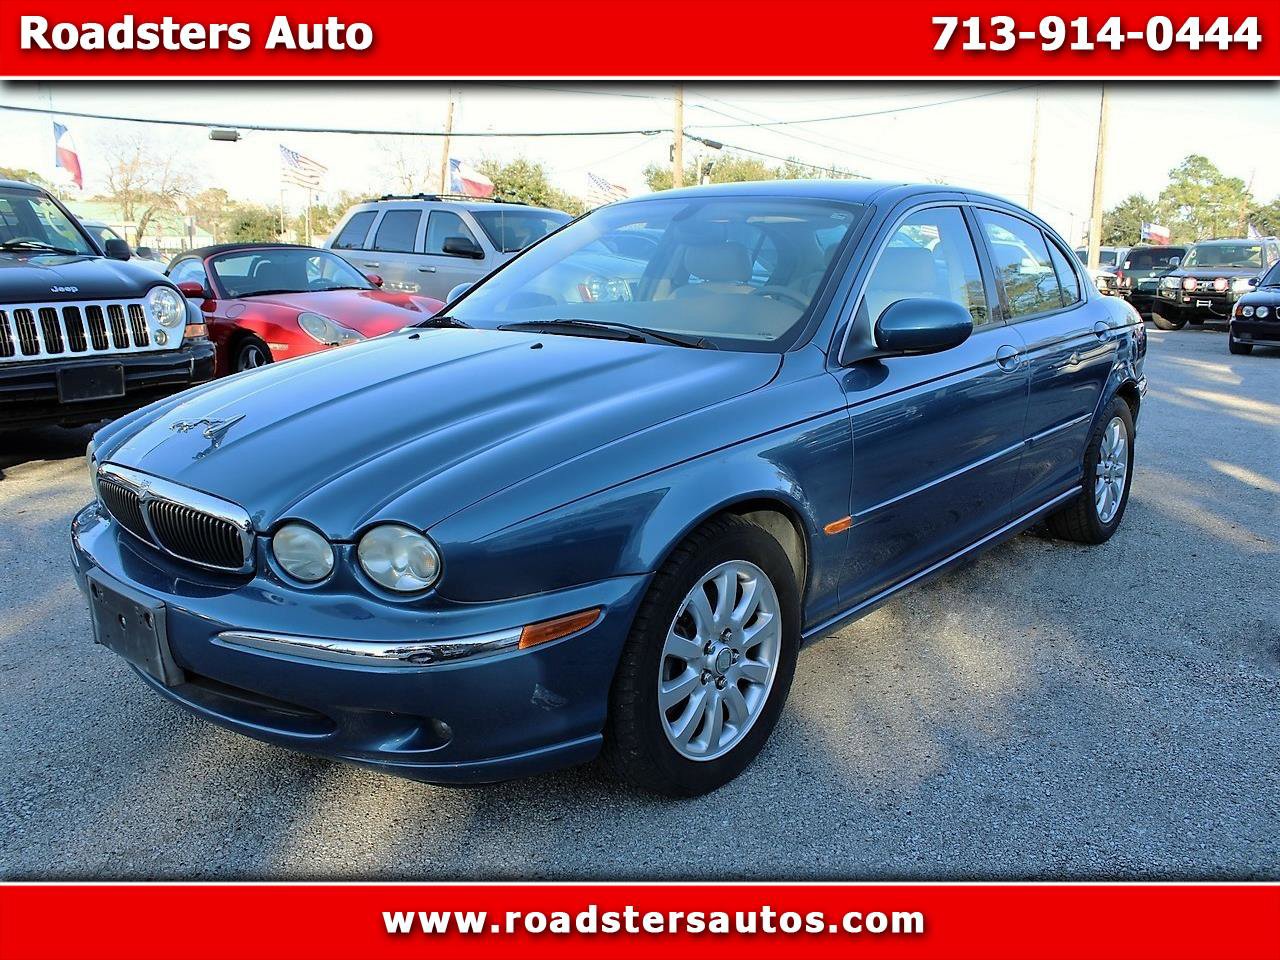 Used 2003 Jaguar X-TYPE for Sale (Test Drive at Home) - Kelley Blue Book